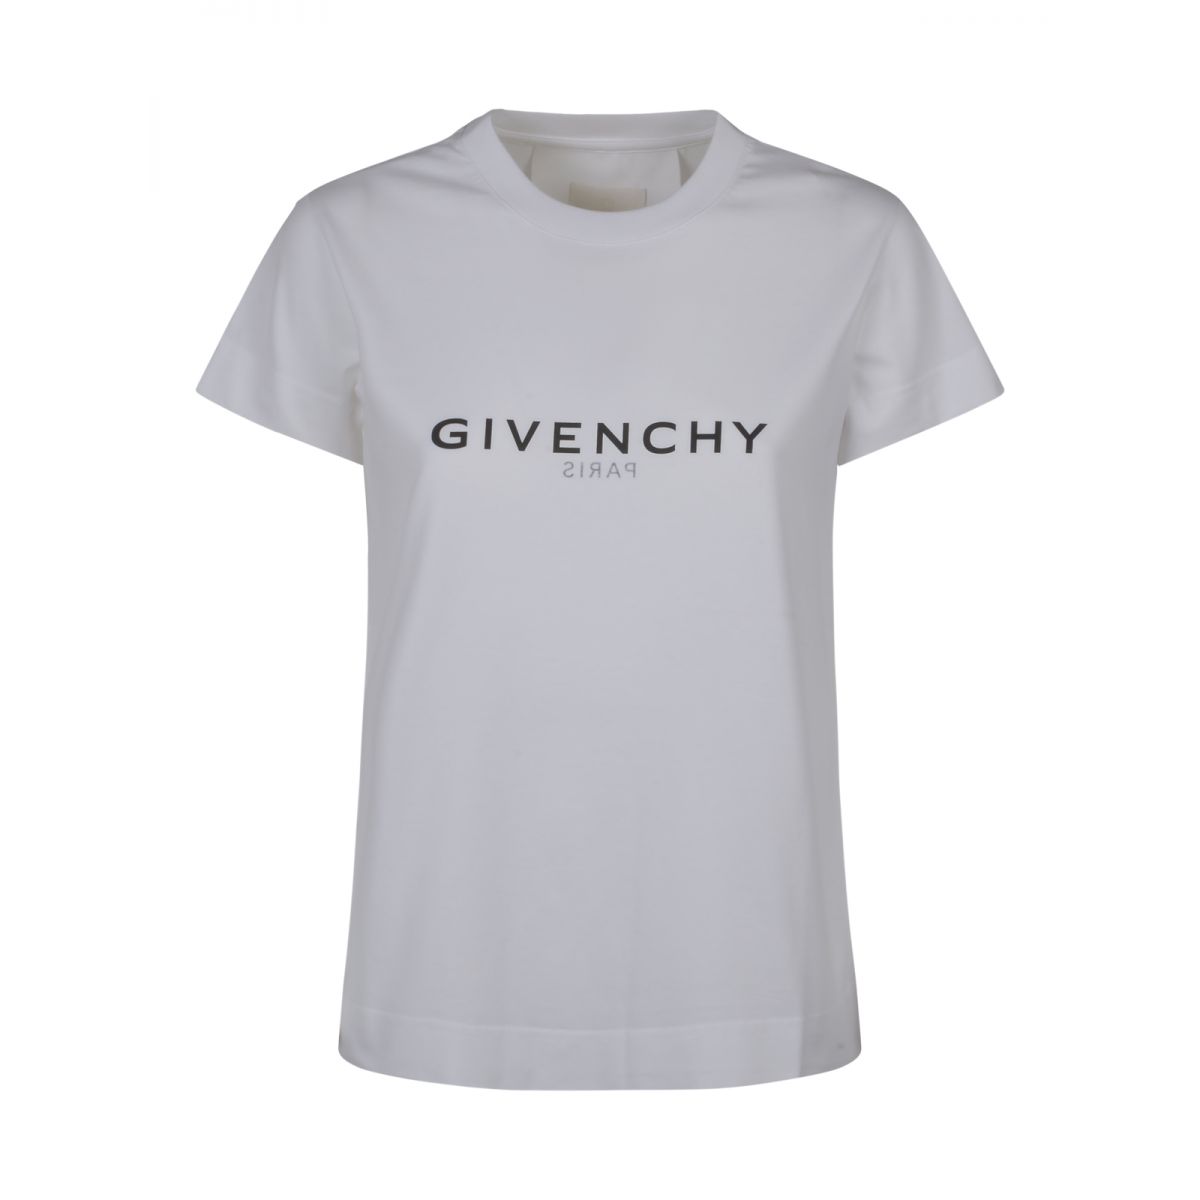 GIVENCHY - Soft jersey T-shirt.